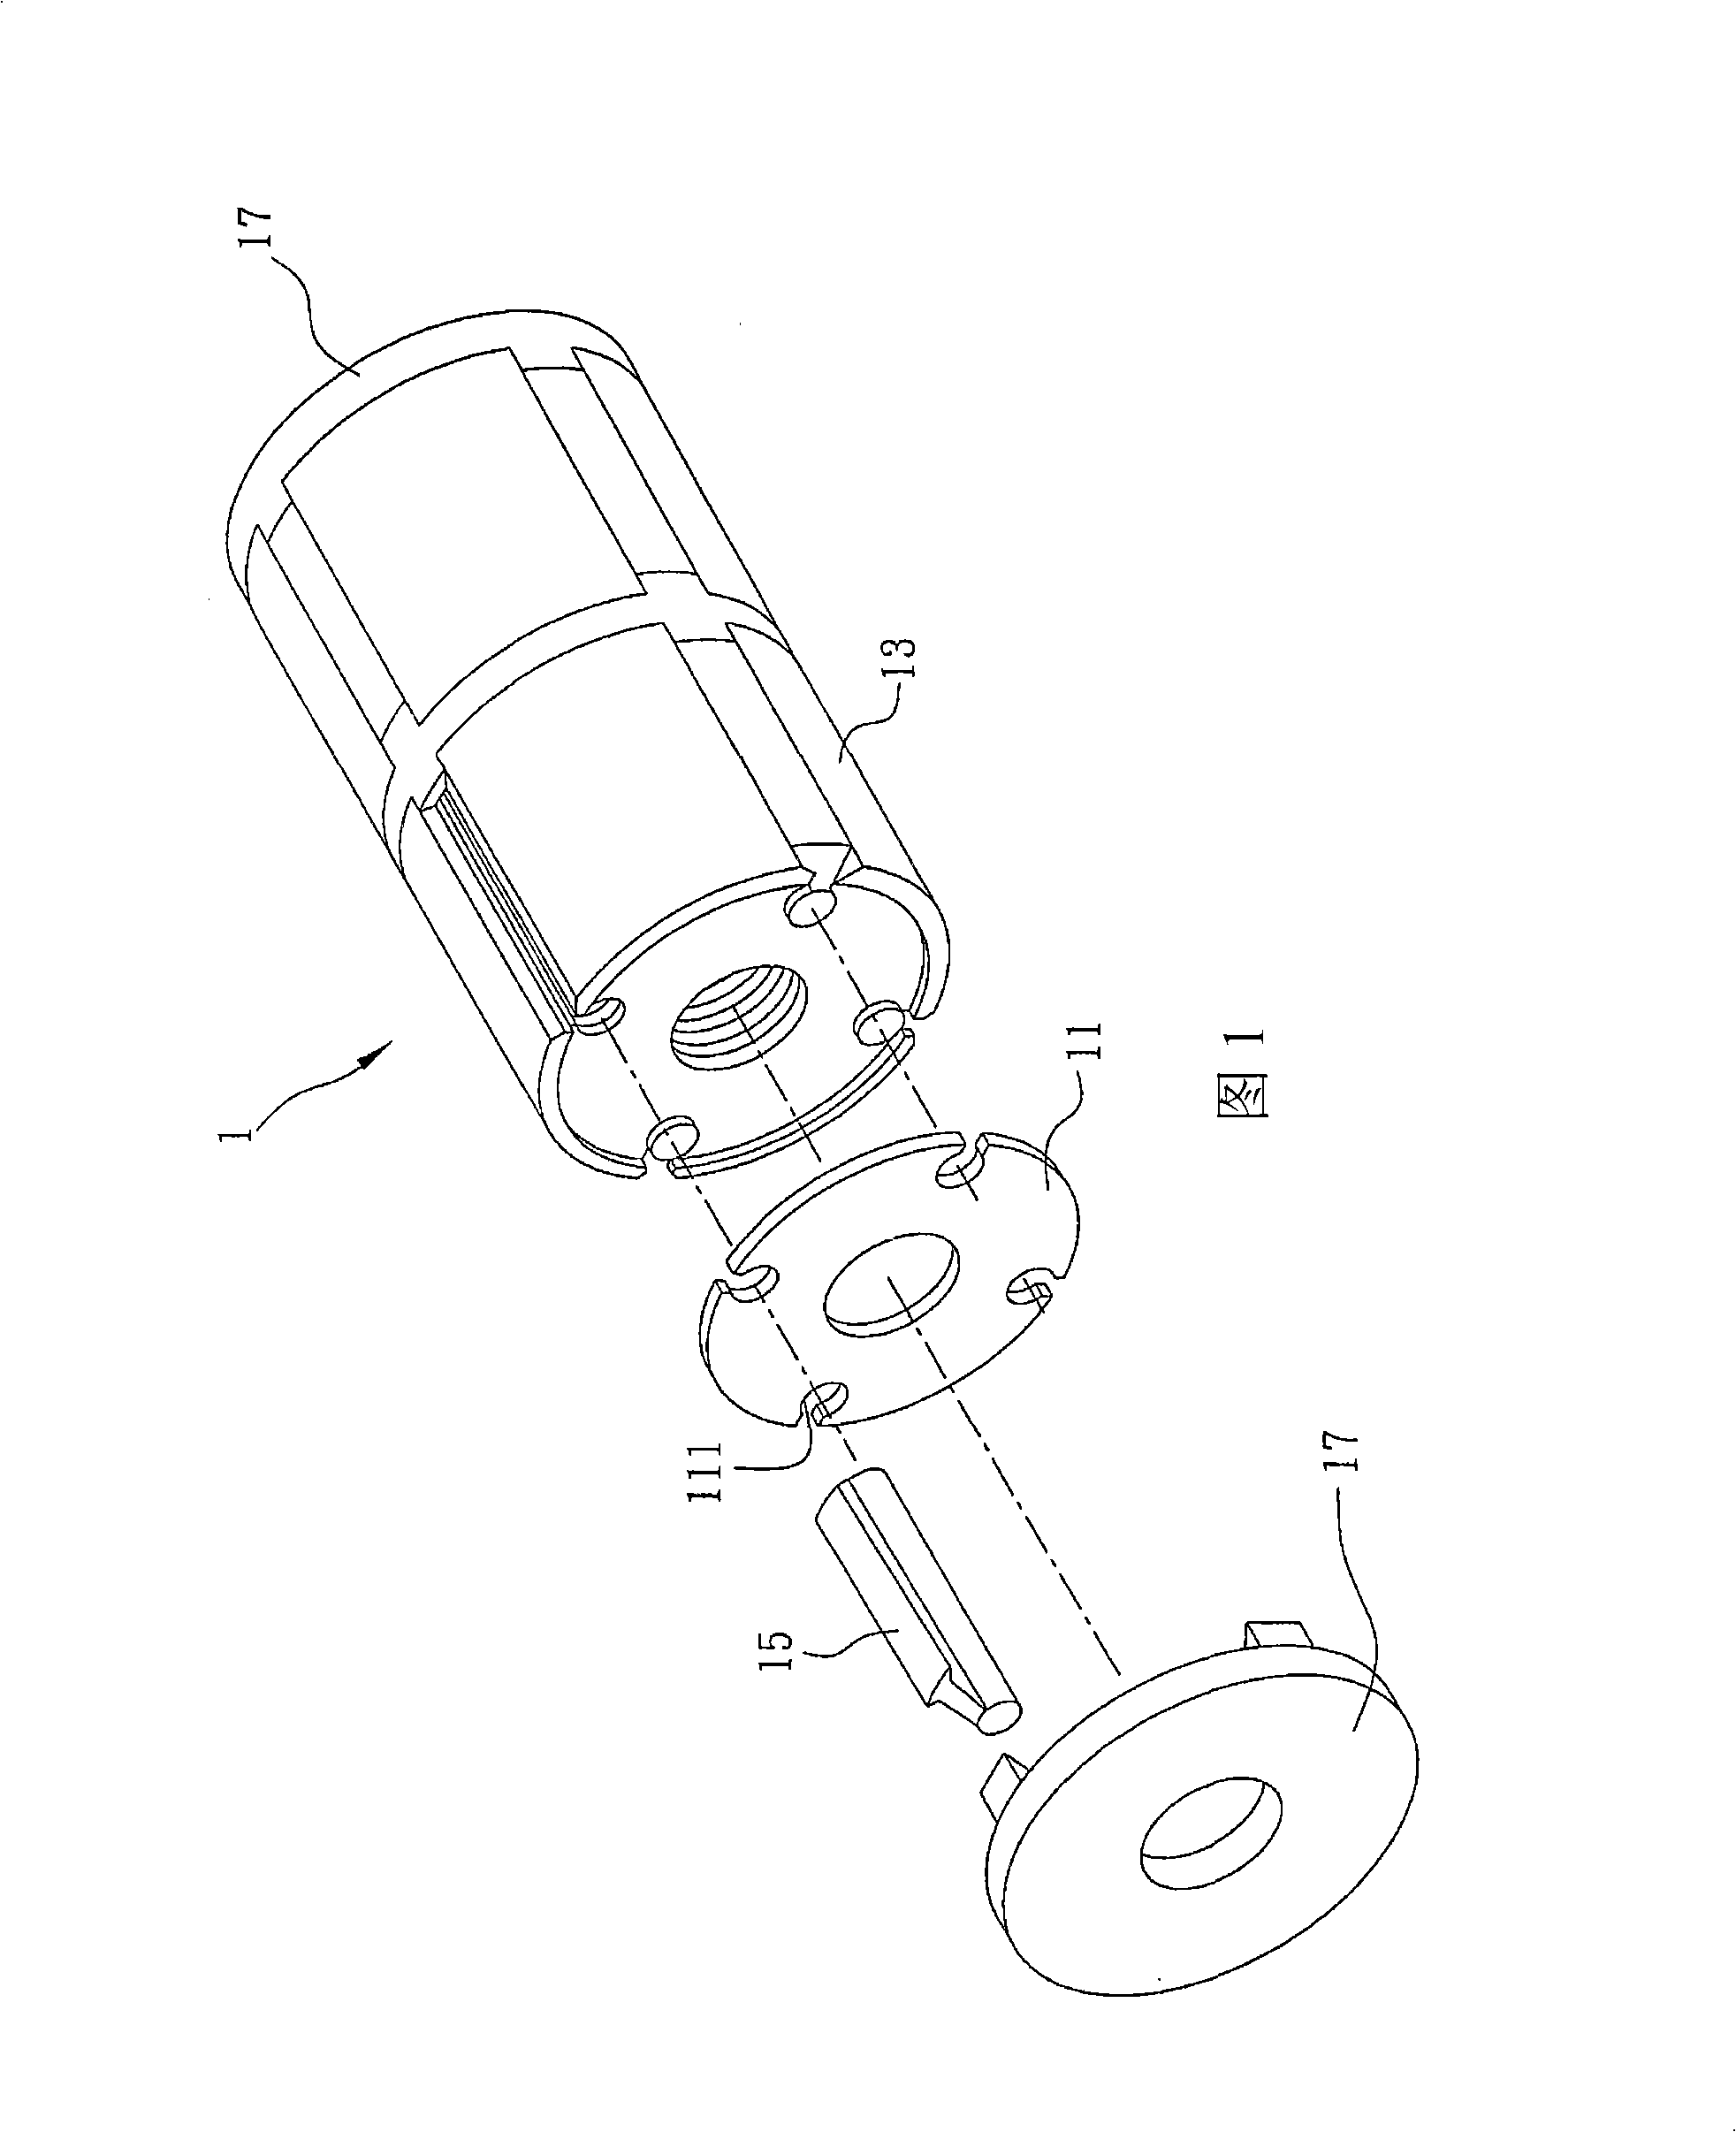 End cap board and motor rotor containing the same